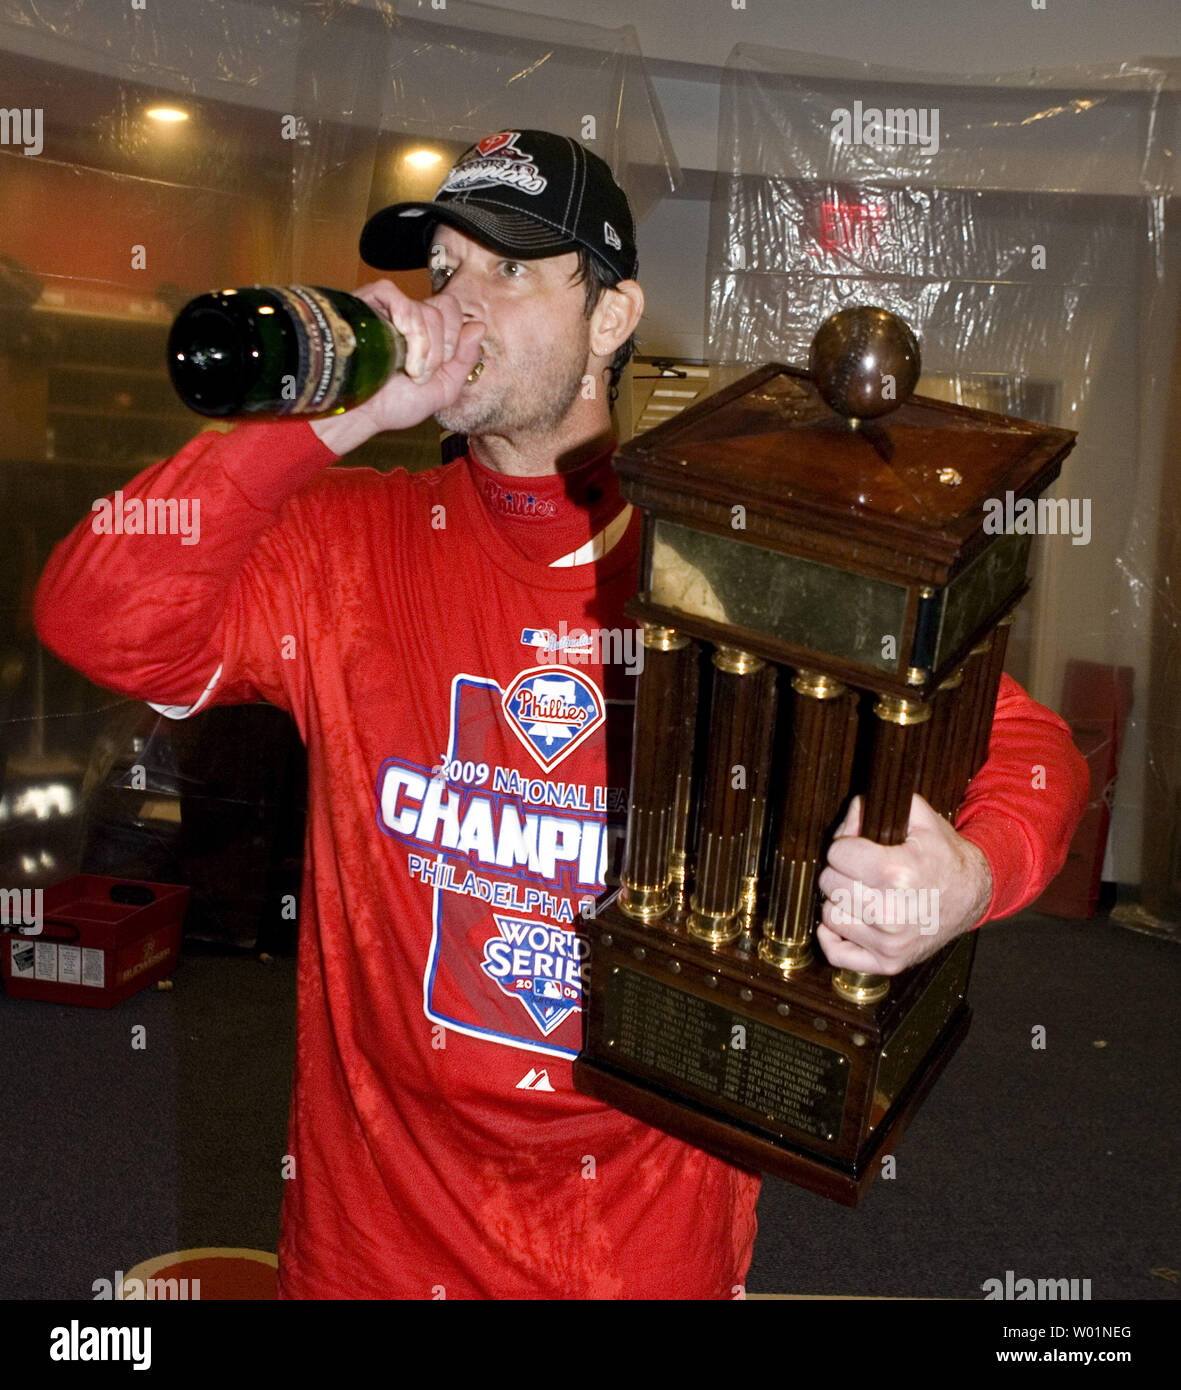 Philadelphia Phillies pitcher Jamie Moyer takes a swig of champagne as he holds the National League Championship trophy during celebrations in the locker room following their 10-4 win over the Los Angeles Dodgers in game five of the National League Championship Series in Philadelphia on October 21, 2009.     UPI/John Anderson Stock Photo